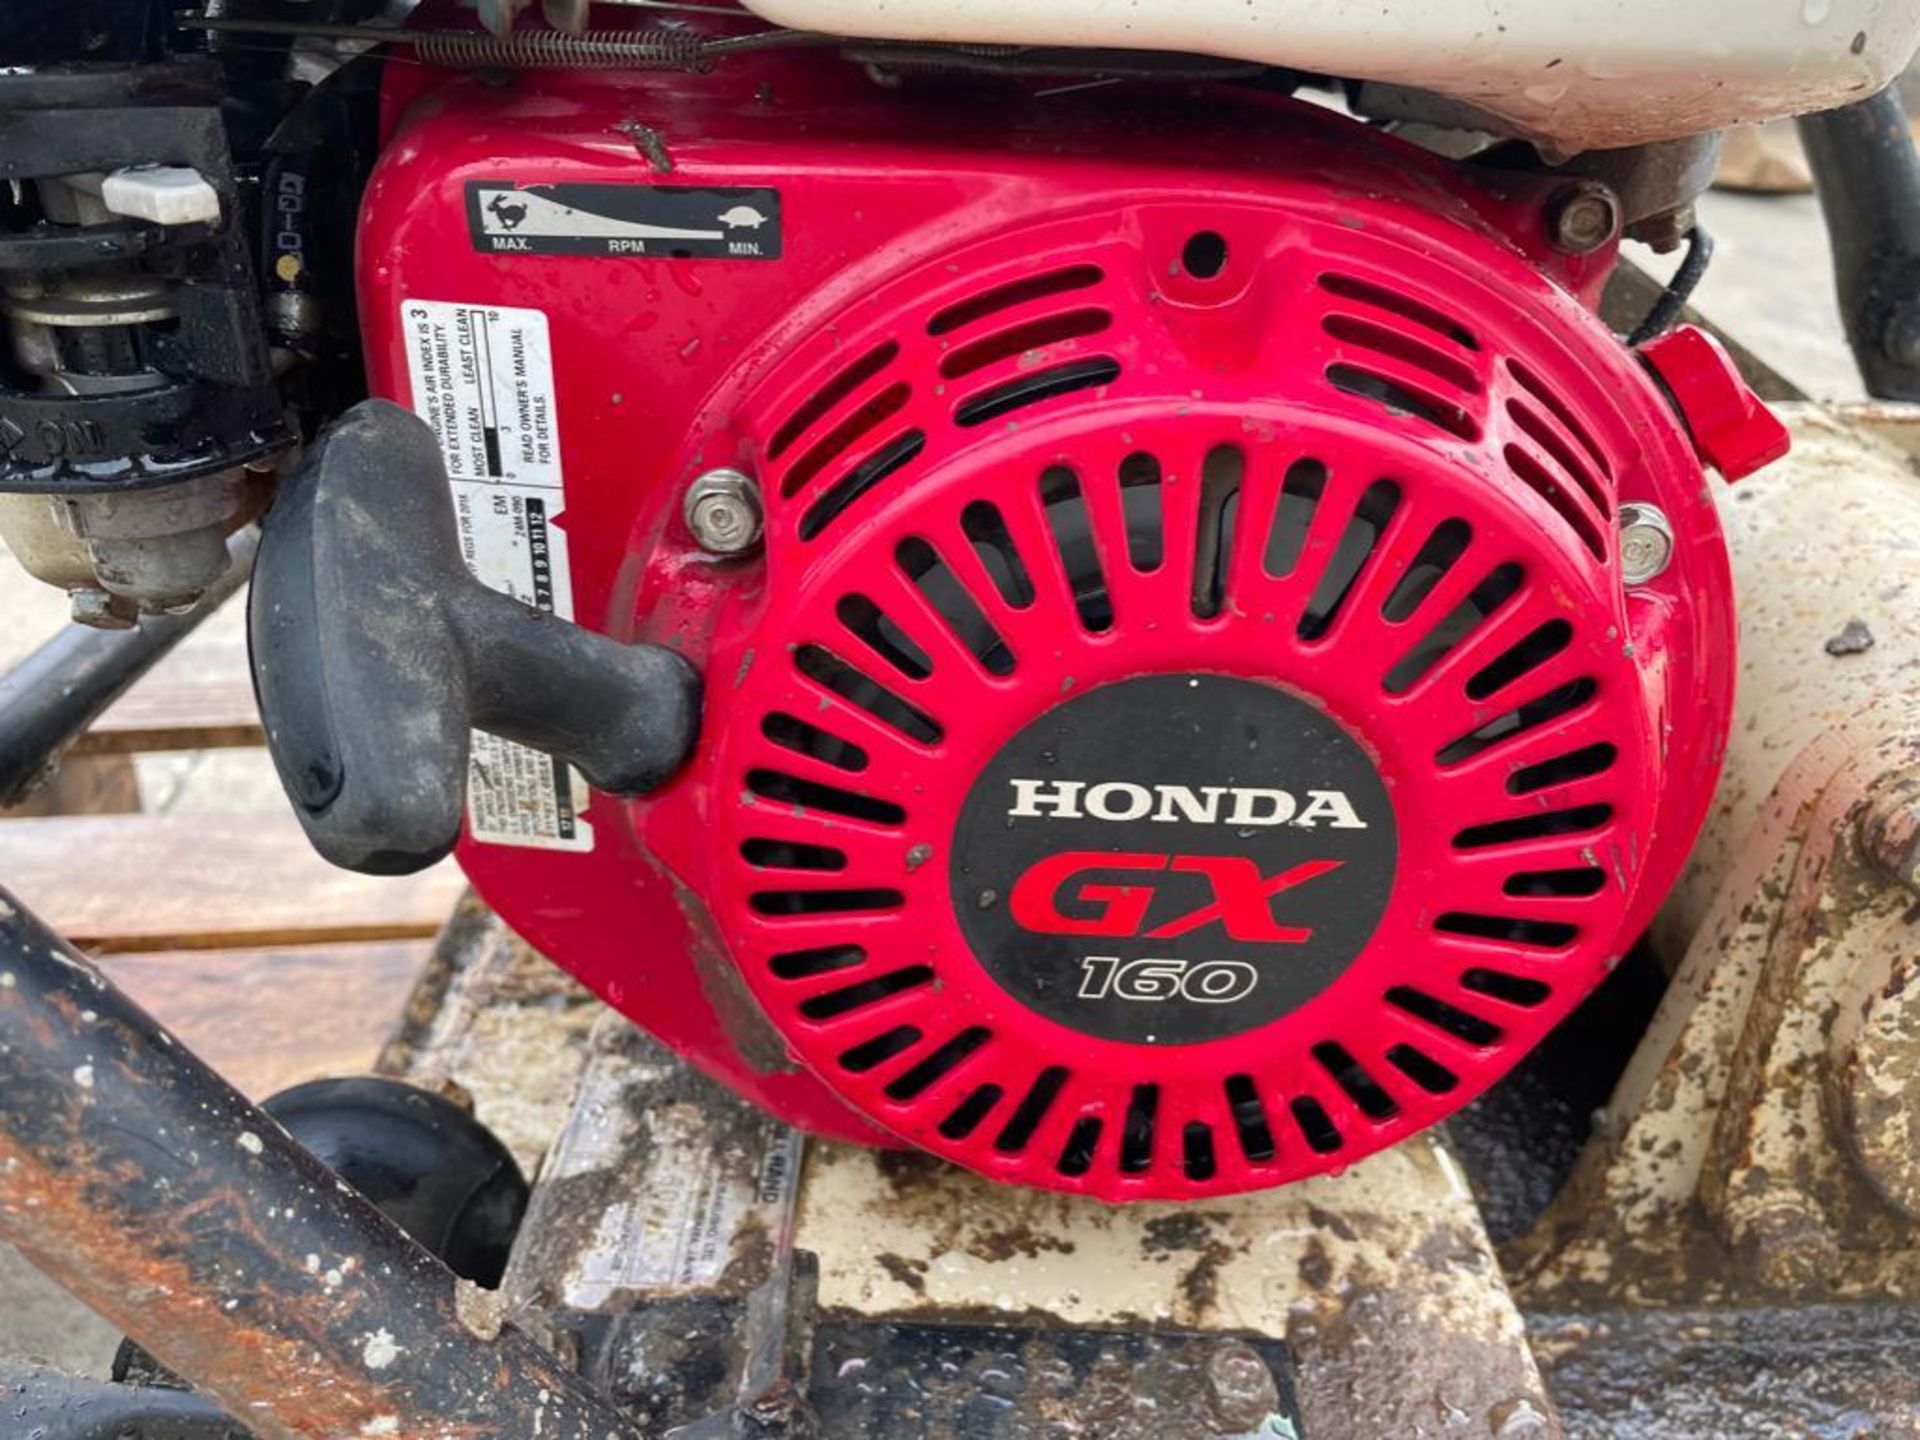 Ingersoll-Rand Plate Compactor, Honda GX160 Engine. Located in Hazelwood, MO - Image 6 of 7